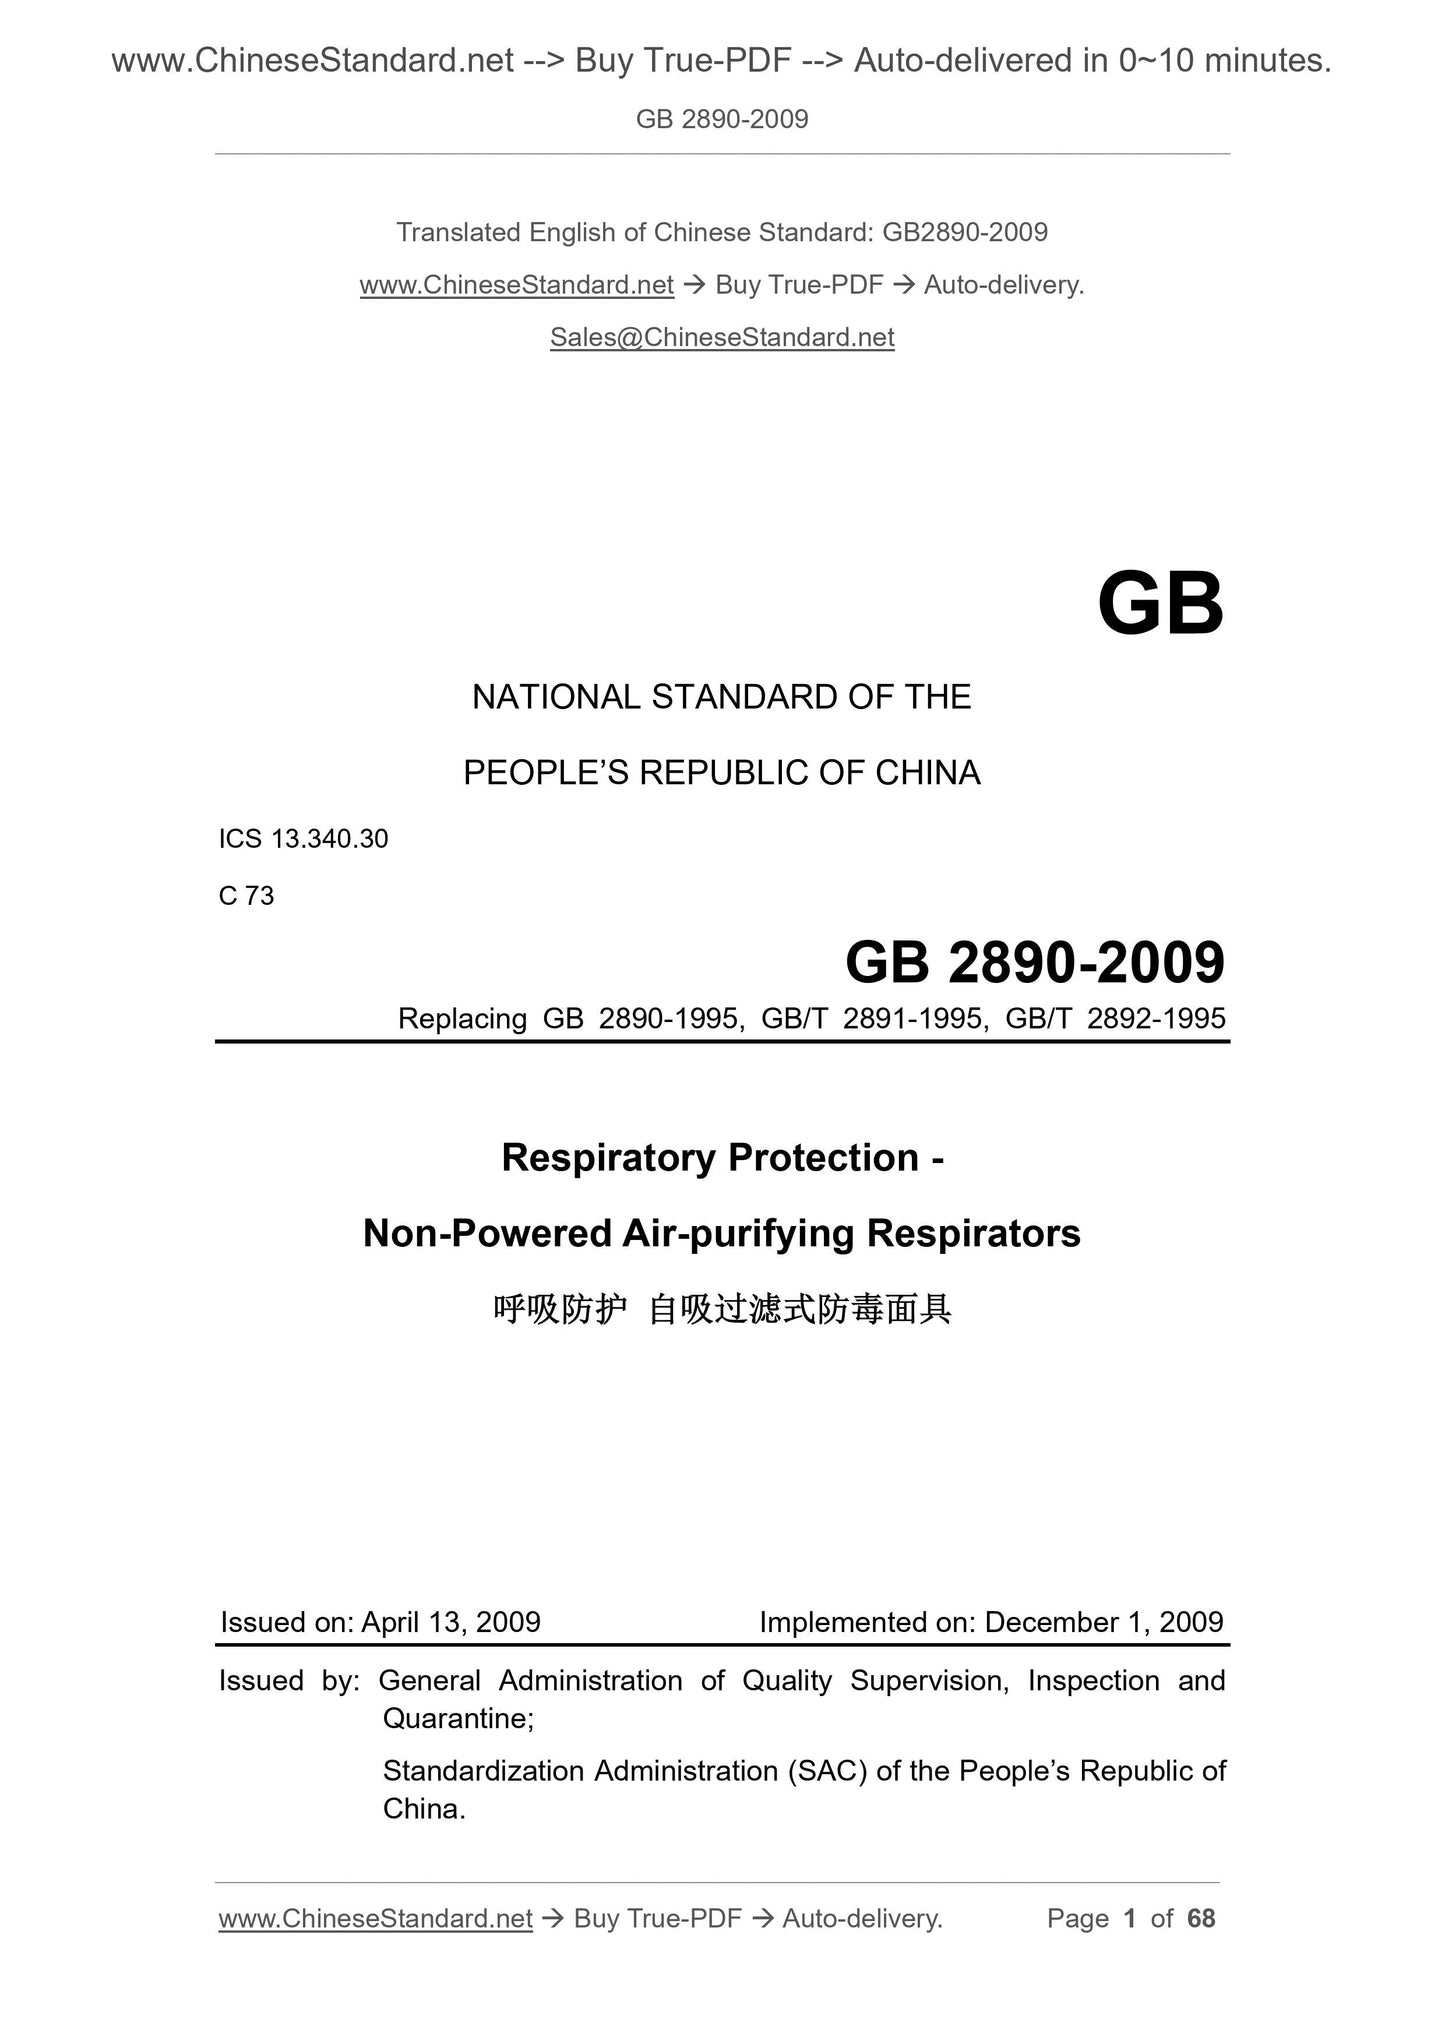 GB 2890-2009 Page 1